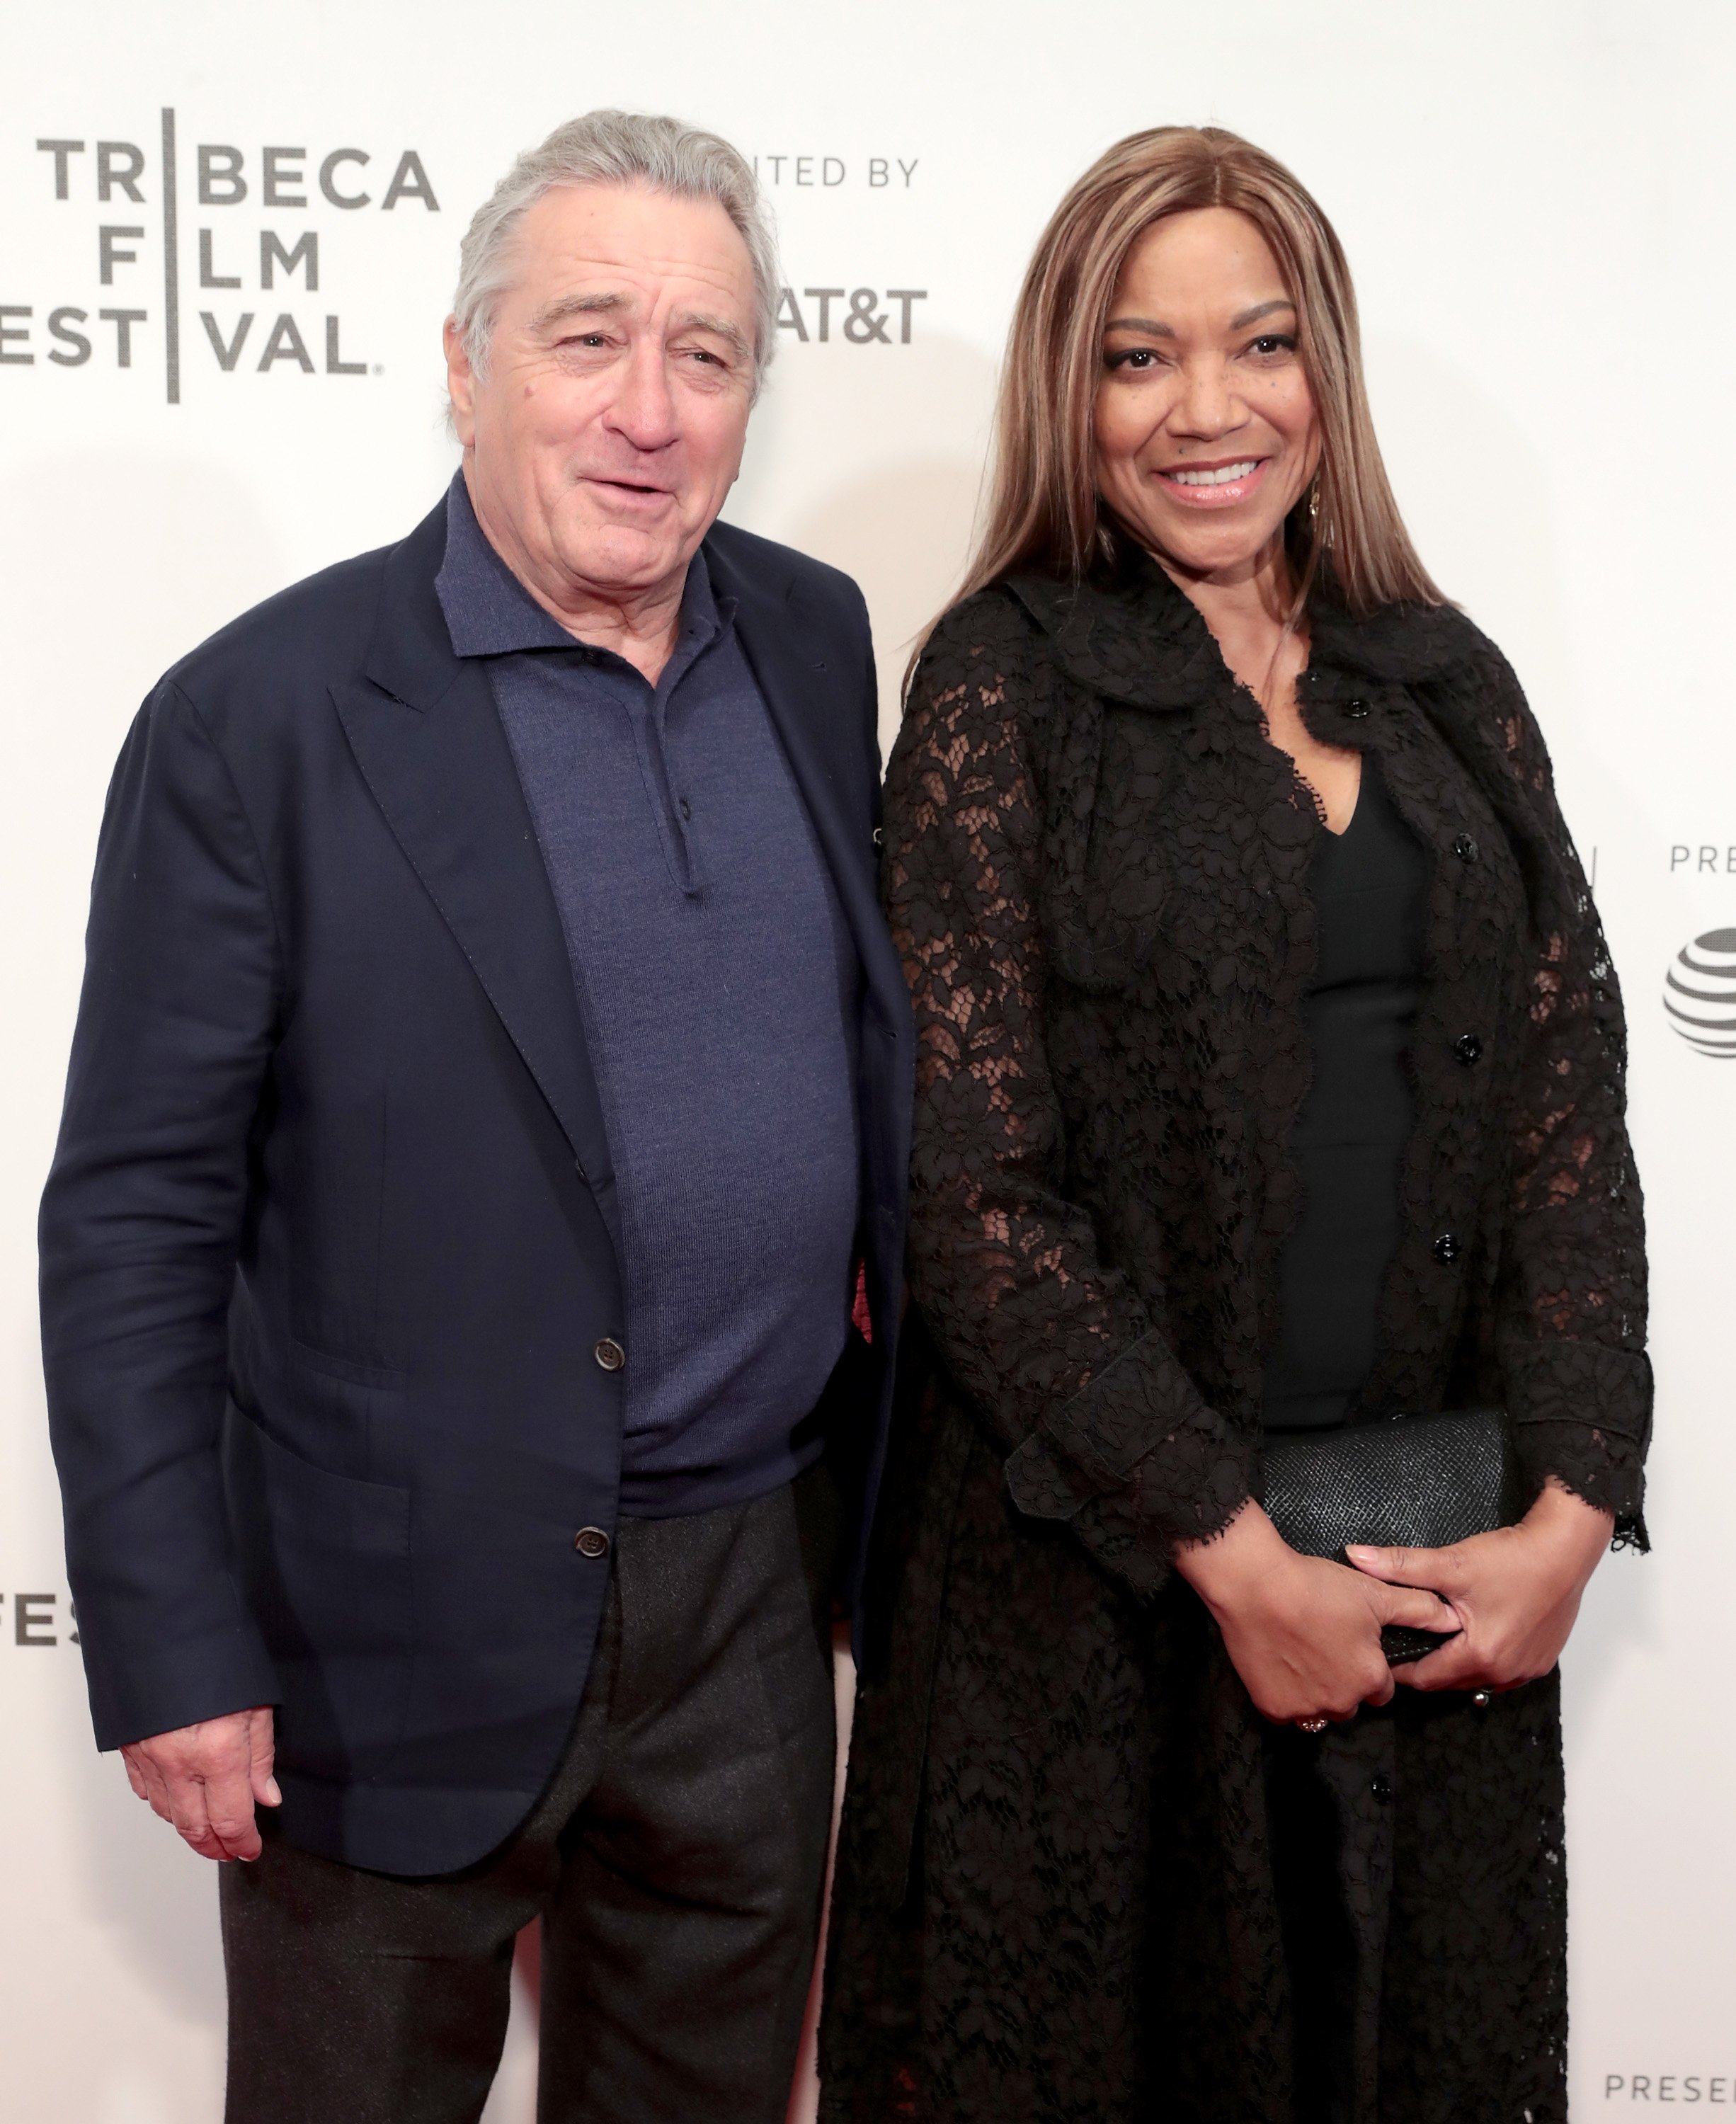 Robert De Niro and Grace Hightower at the screening of "The Fourth Estate" at BMCC Tribeca PAC on April 28, 2018 in New York City. | Photo: Getty Images